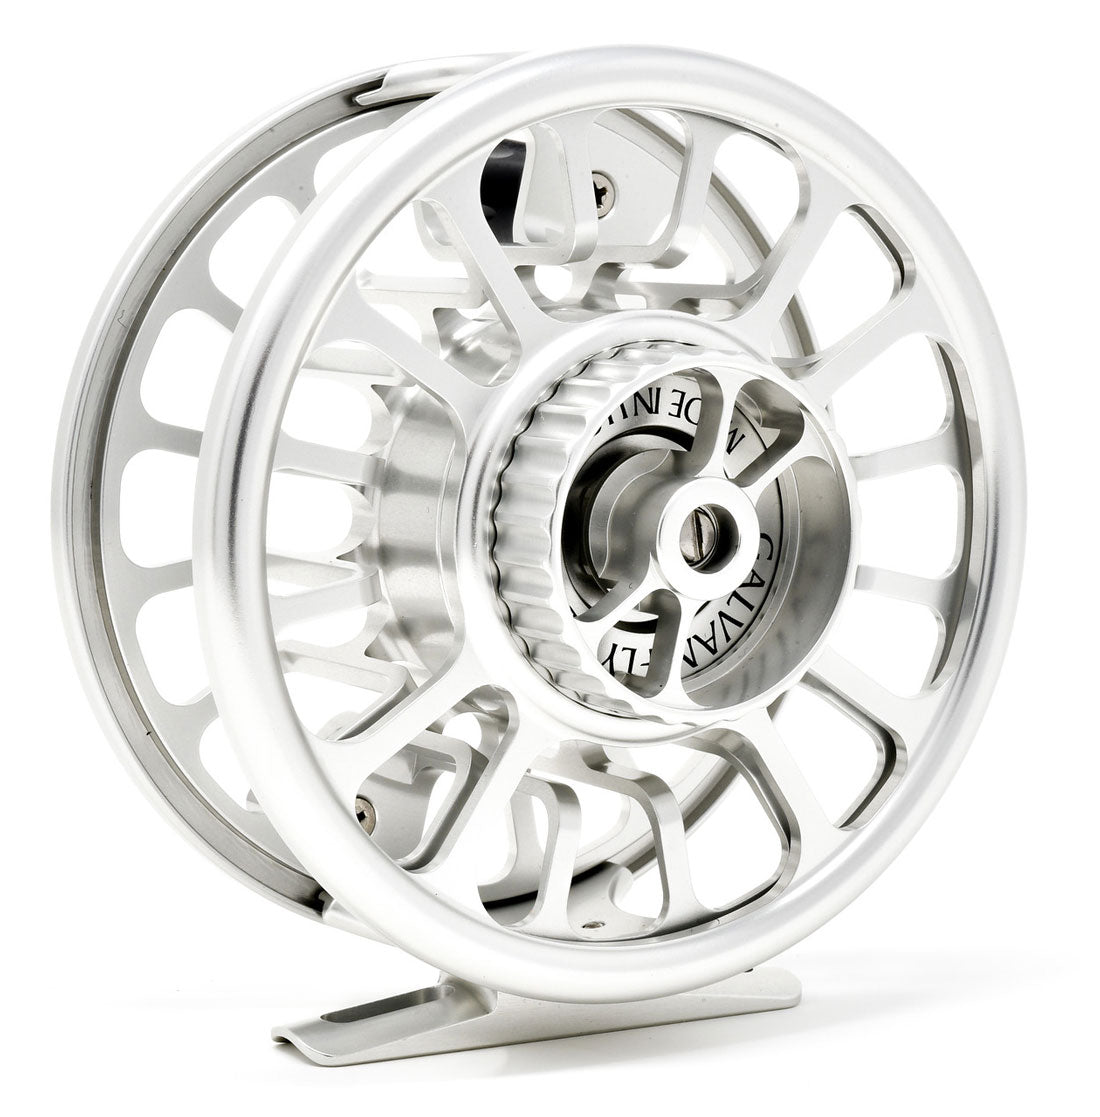 Galvan Torque Fly Reel – All Points Fly Shop Outfitter